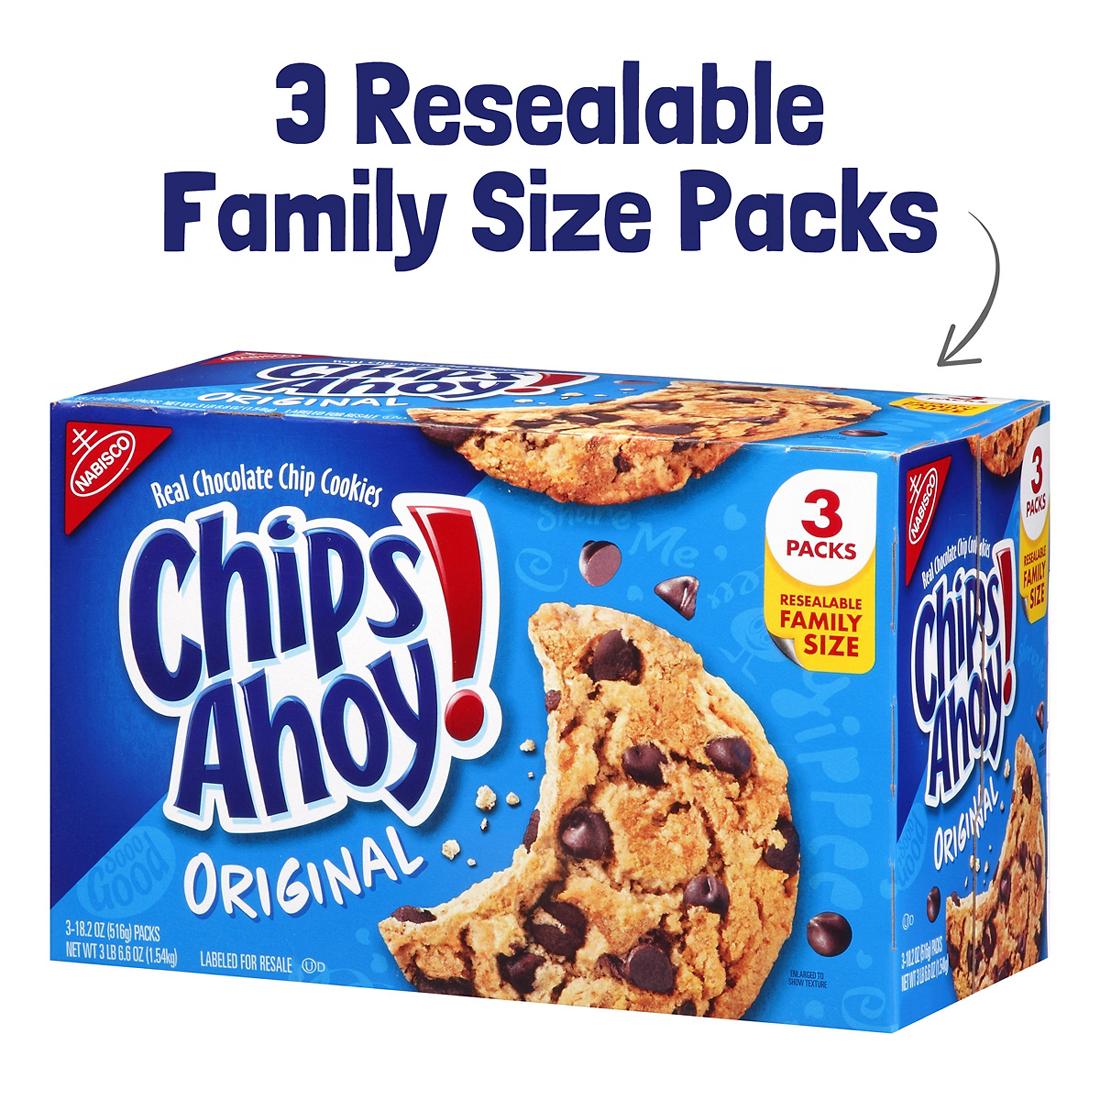 Nabisco Chips Ahoy Cookies, 3 Family Size Packs $5.83 each (Great Value Buy)